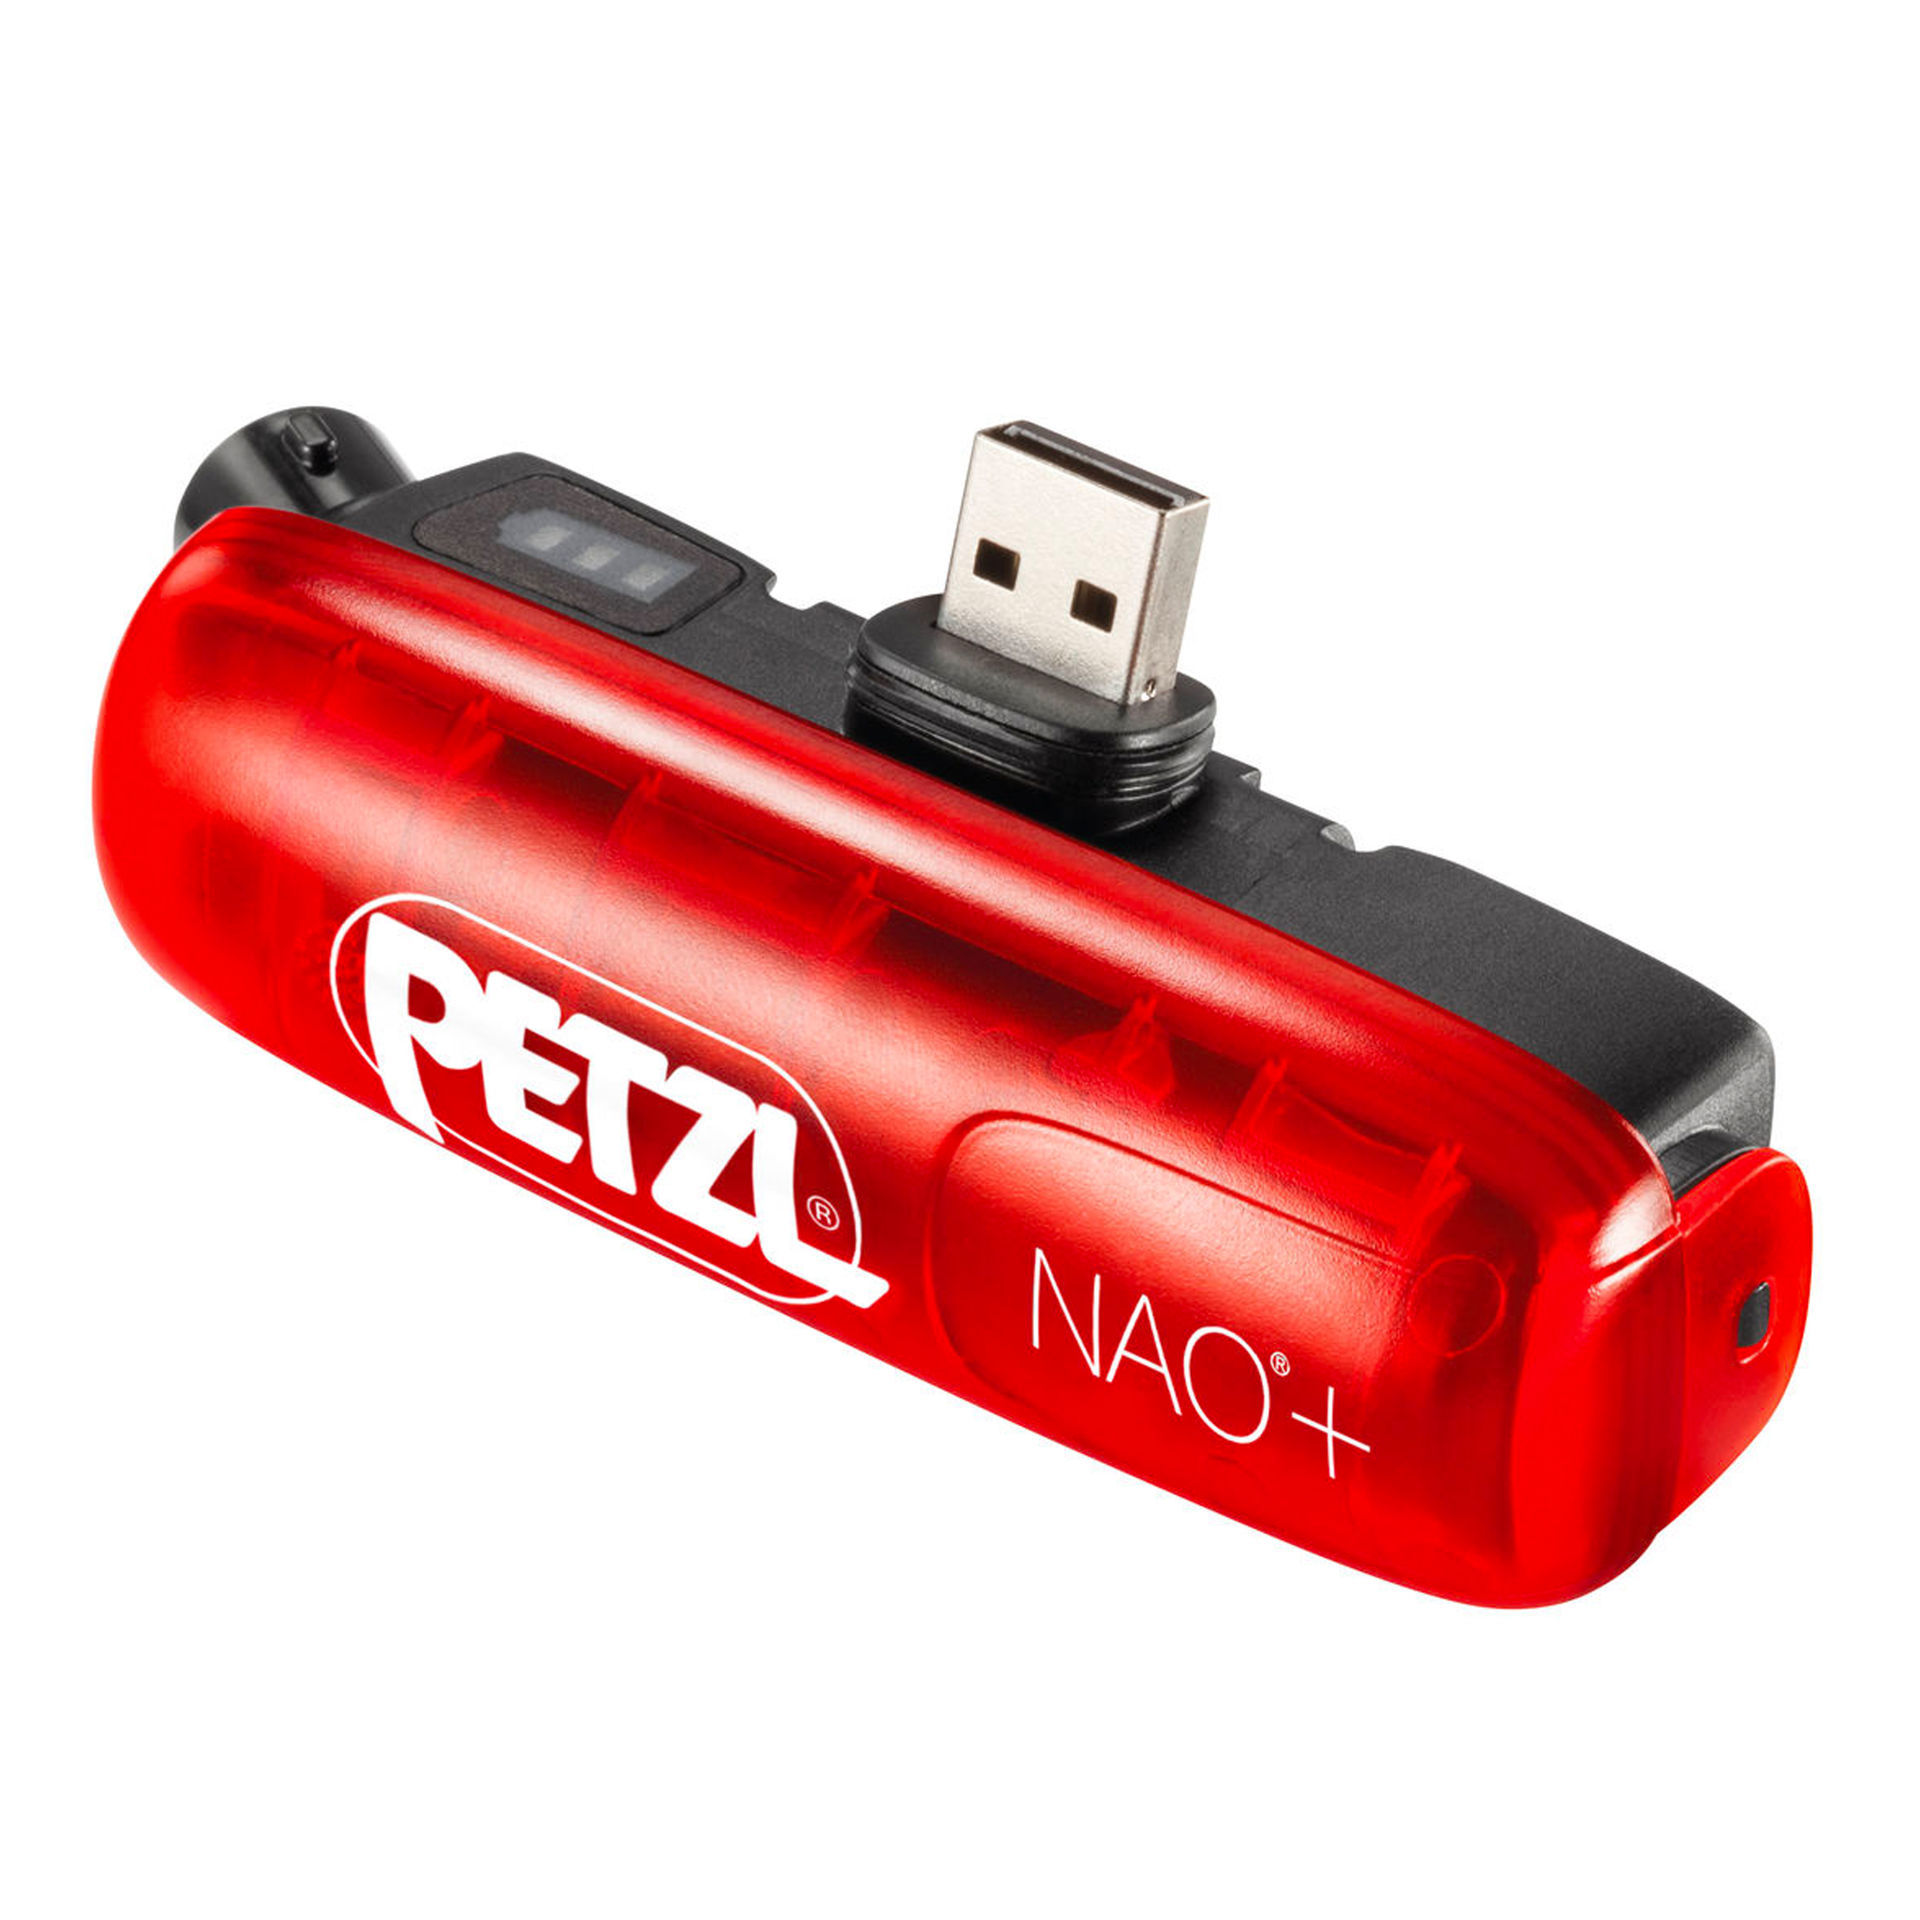 Petzl Nao+ Rechargeable Battery